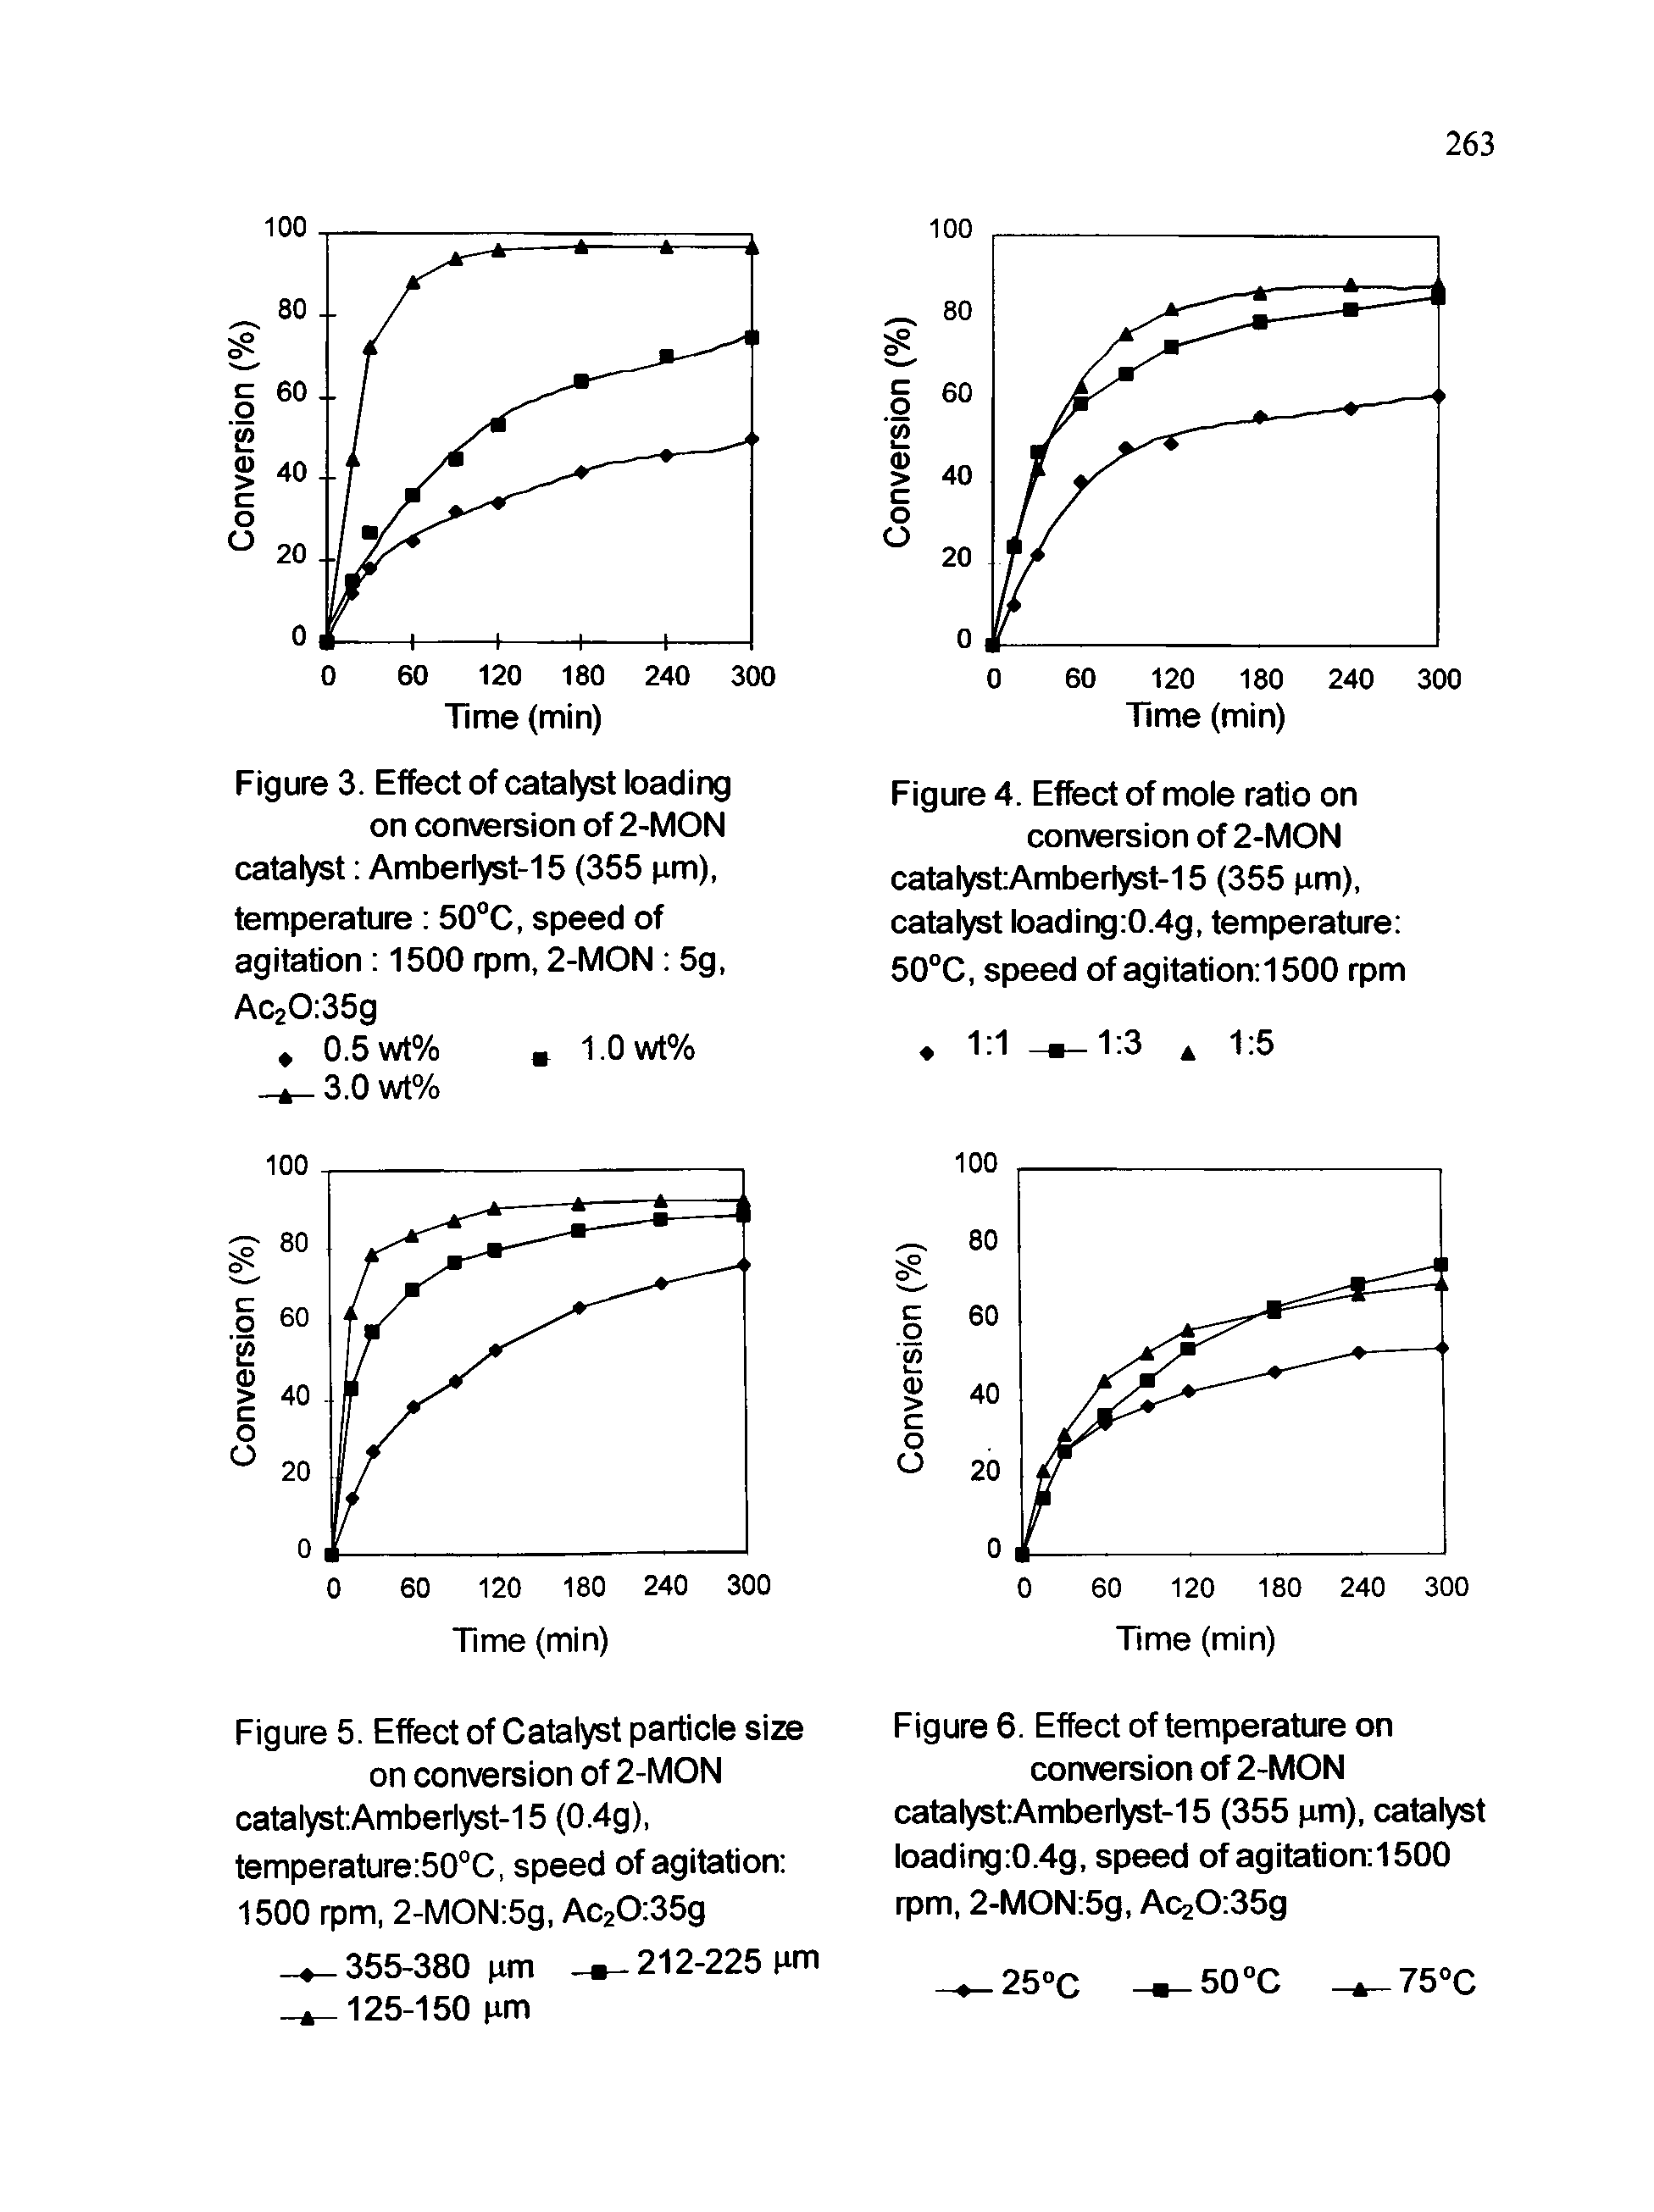 Figure 6. Effect of temperature on conversion of 2-MON catalyst Amberlyst-15 (355 pm), catalyst loading 0.4g, speed of agitation 1500 rpm, 2-MON 5g, Ac20 35g...